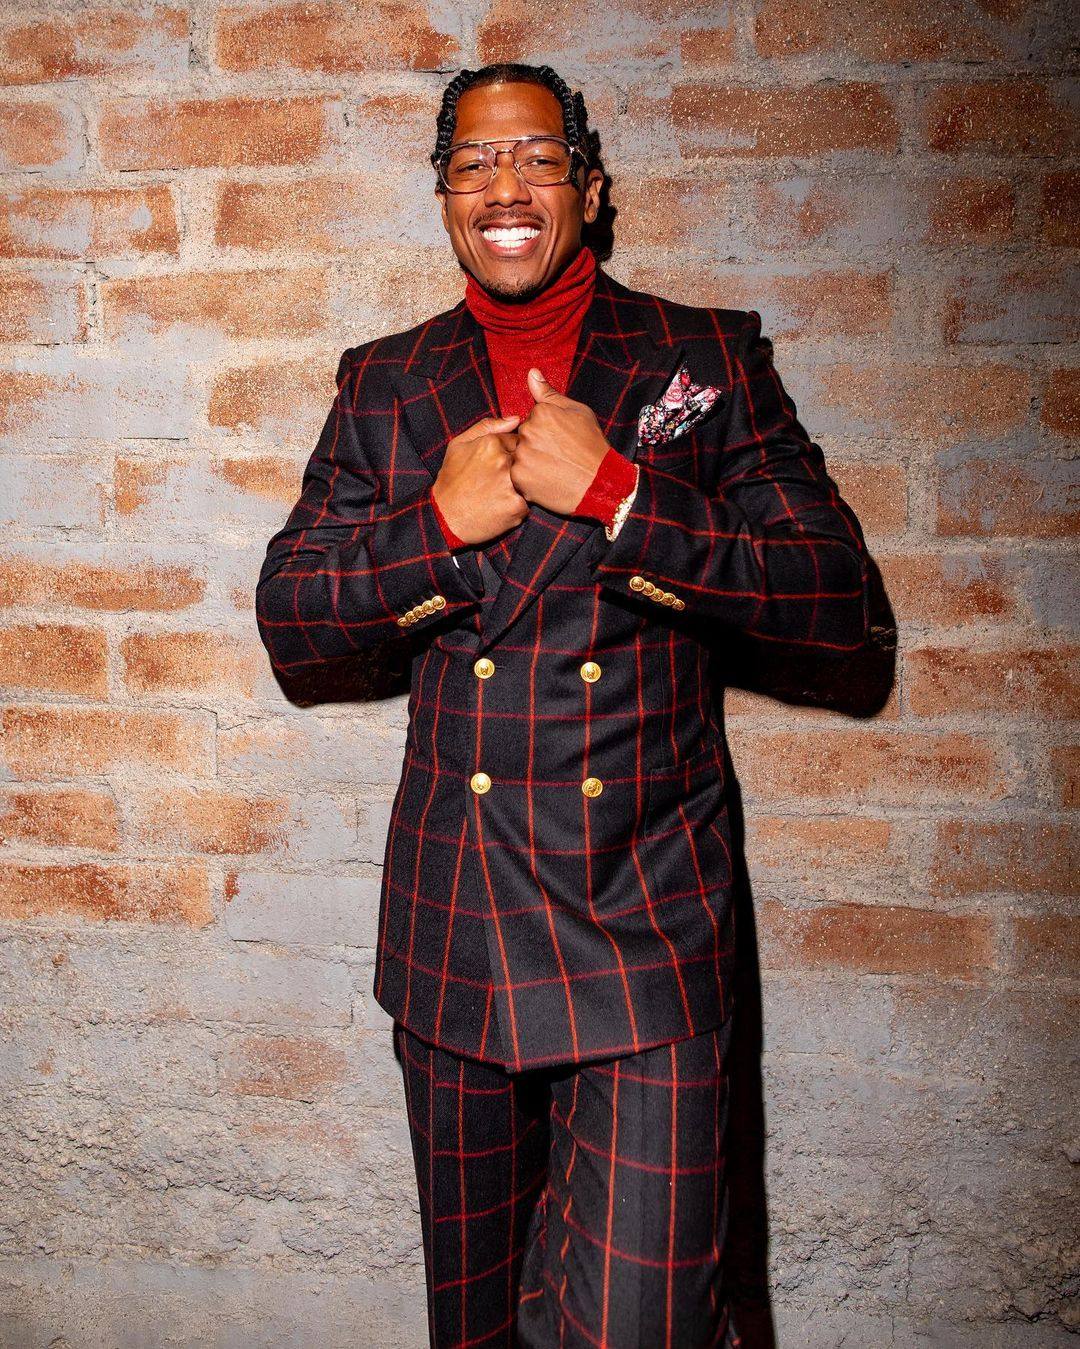 Nick Cannon may have made an unusual lifestyle choice by having 11 children, but he’s working hard to pay for it. Photo: @nickcannon/Instagram